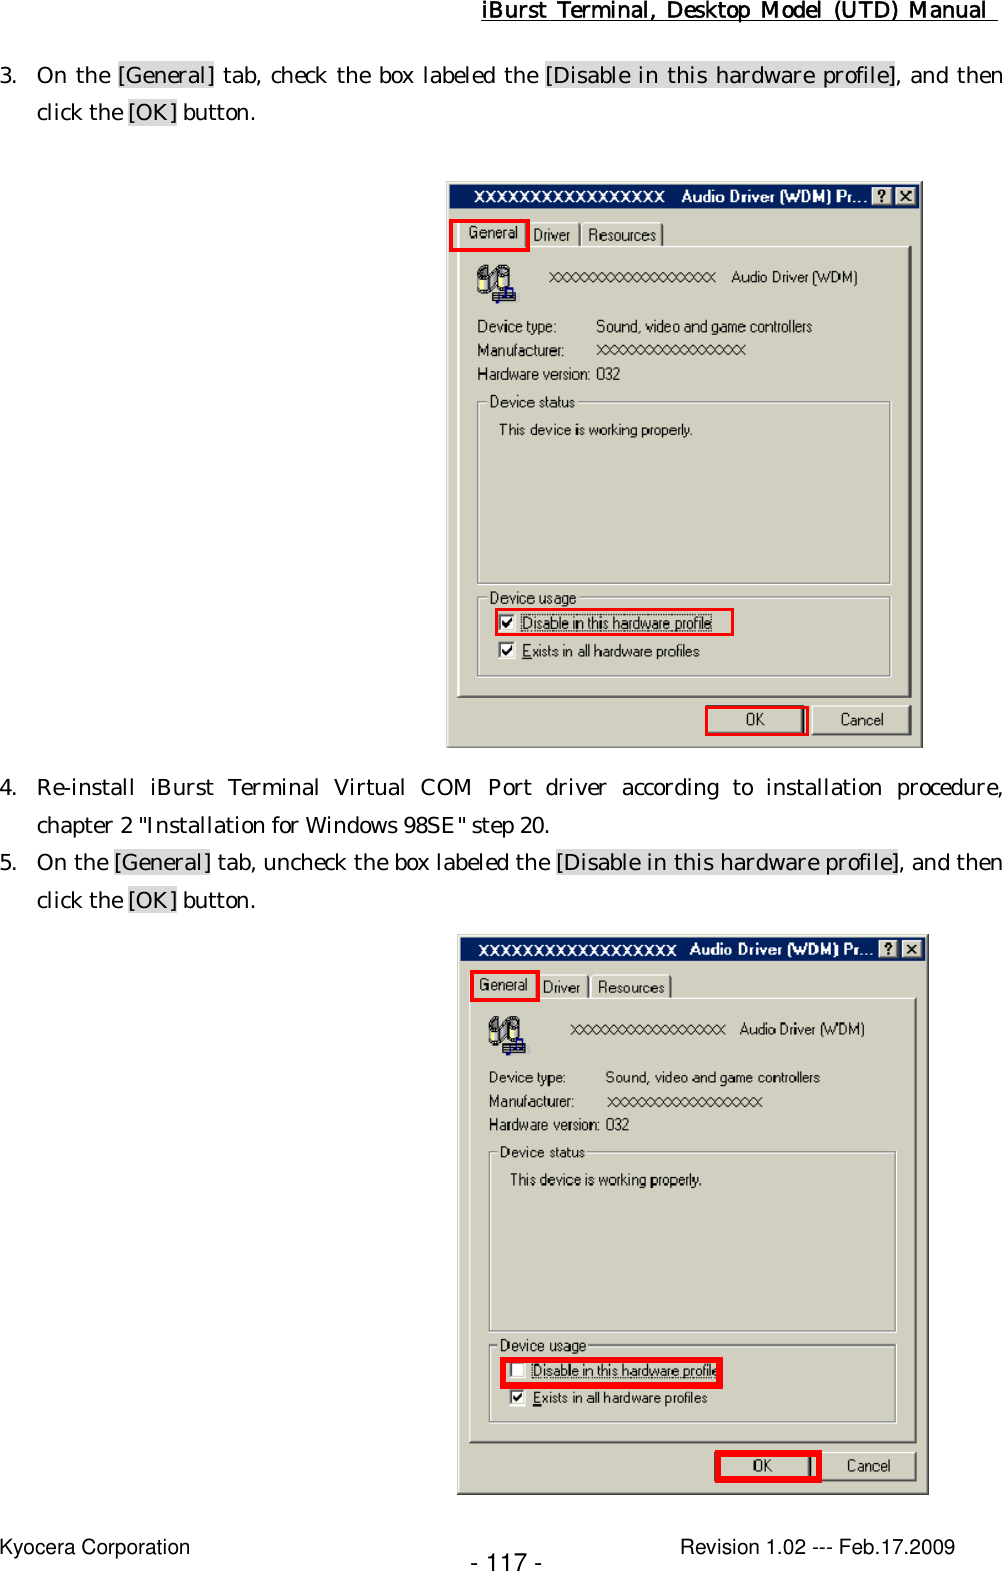 iBurst  Terminal, Desktop  Model  (UTD)  Manual    Kyocera Corporation                                                                                              Revision 1.02 --- Feb.17.2009 - 117 - 3. On the [General] tab, check the box labeled the [Disable in this hardware profile], and then click the [OK] button.                  4. Re-install  iBurst  Terminal  Virtual  COM  Port  driver  according  to  installation  procedure,   chapter 2 &quot;Installation for Windows 98SE&quot; step 20. 5. On the [General] tab, uncheck the box labeled the [Disable in this hardware profile], and then click the [OK] button.         